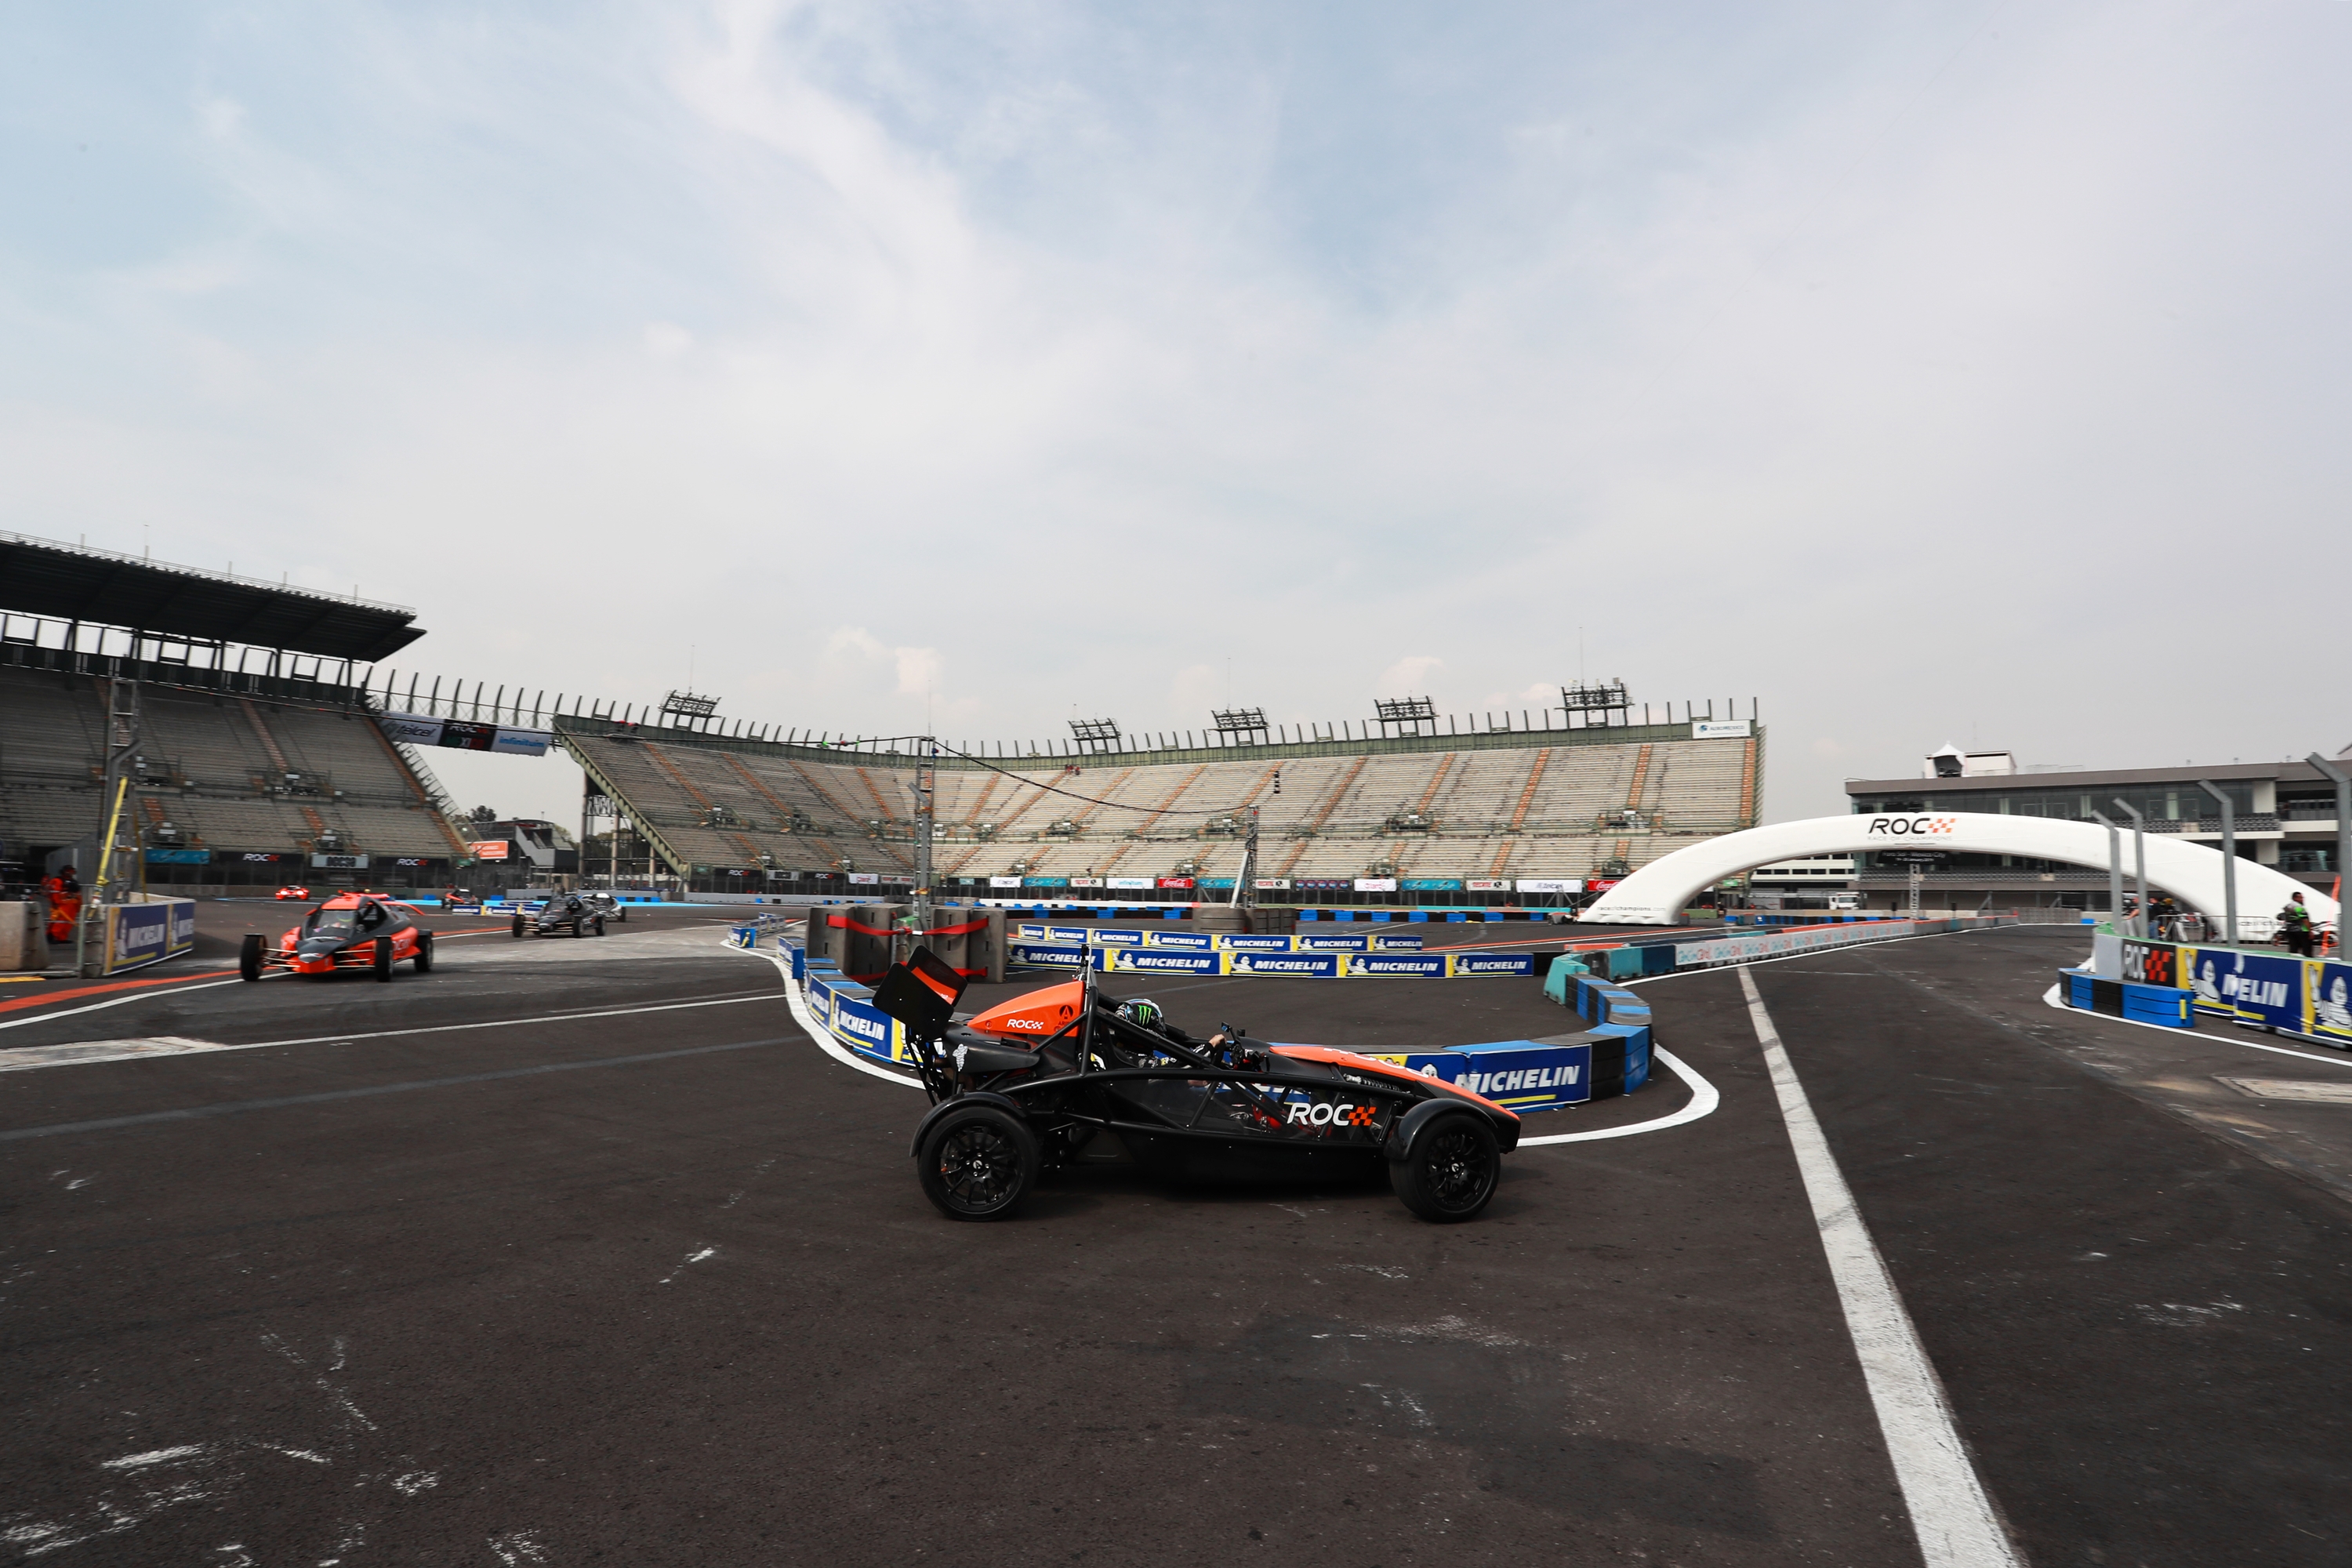 competitors_practice_during_previews_to_the_race_of_champions_on_thursday_17_january_2019_at_foro_sol_mexico_city_mexico_0068.JPG